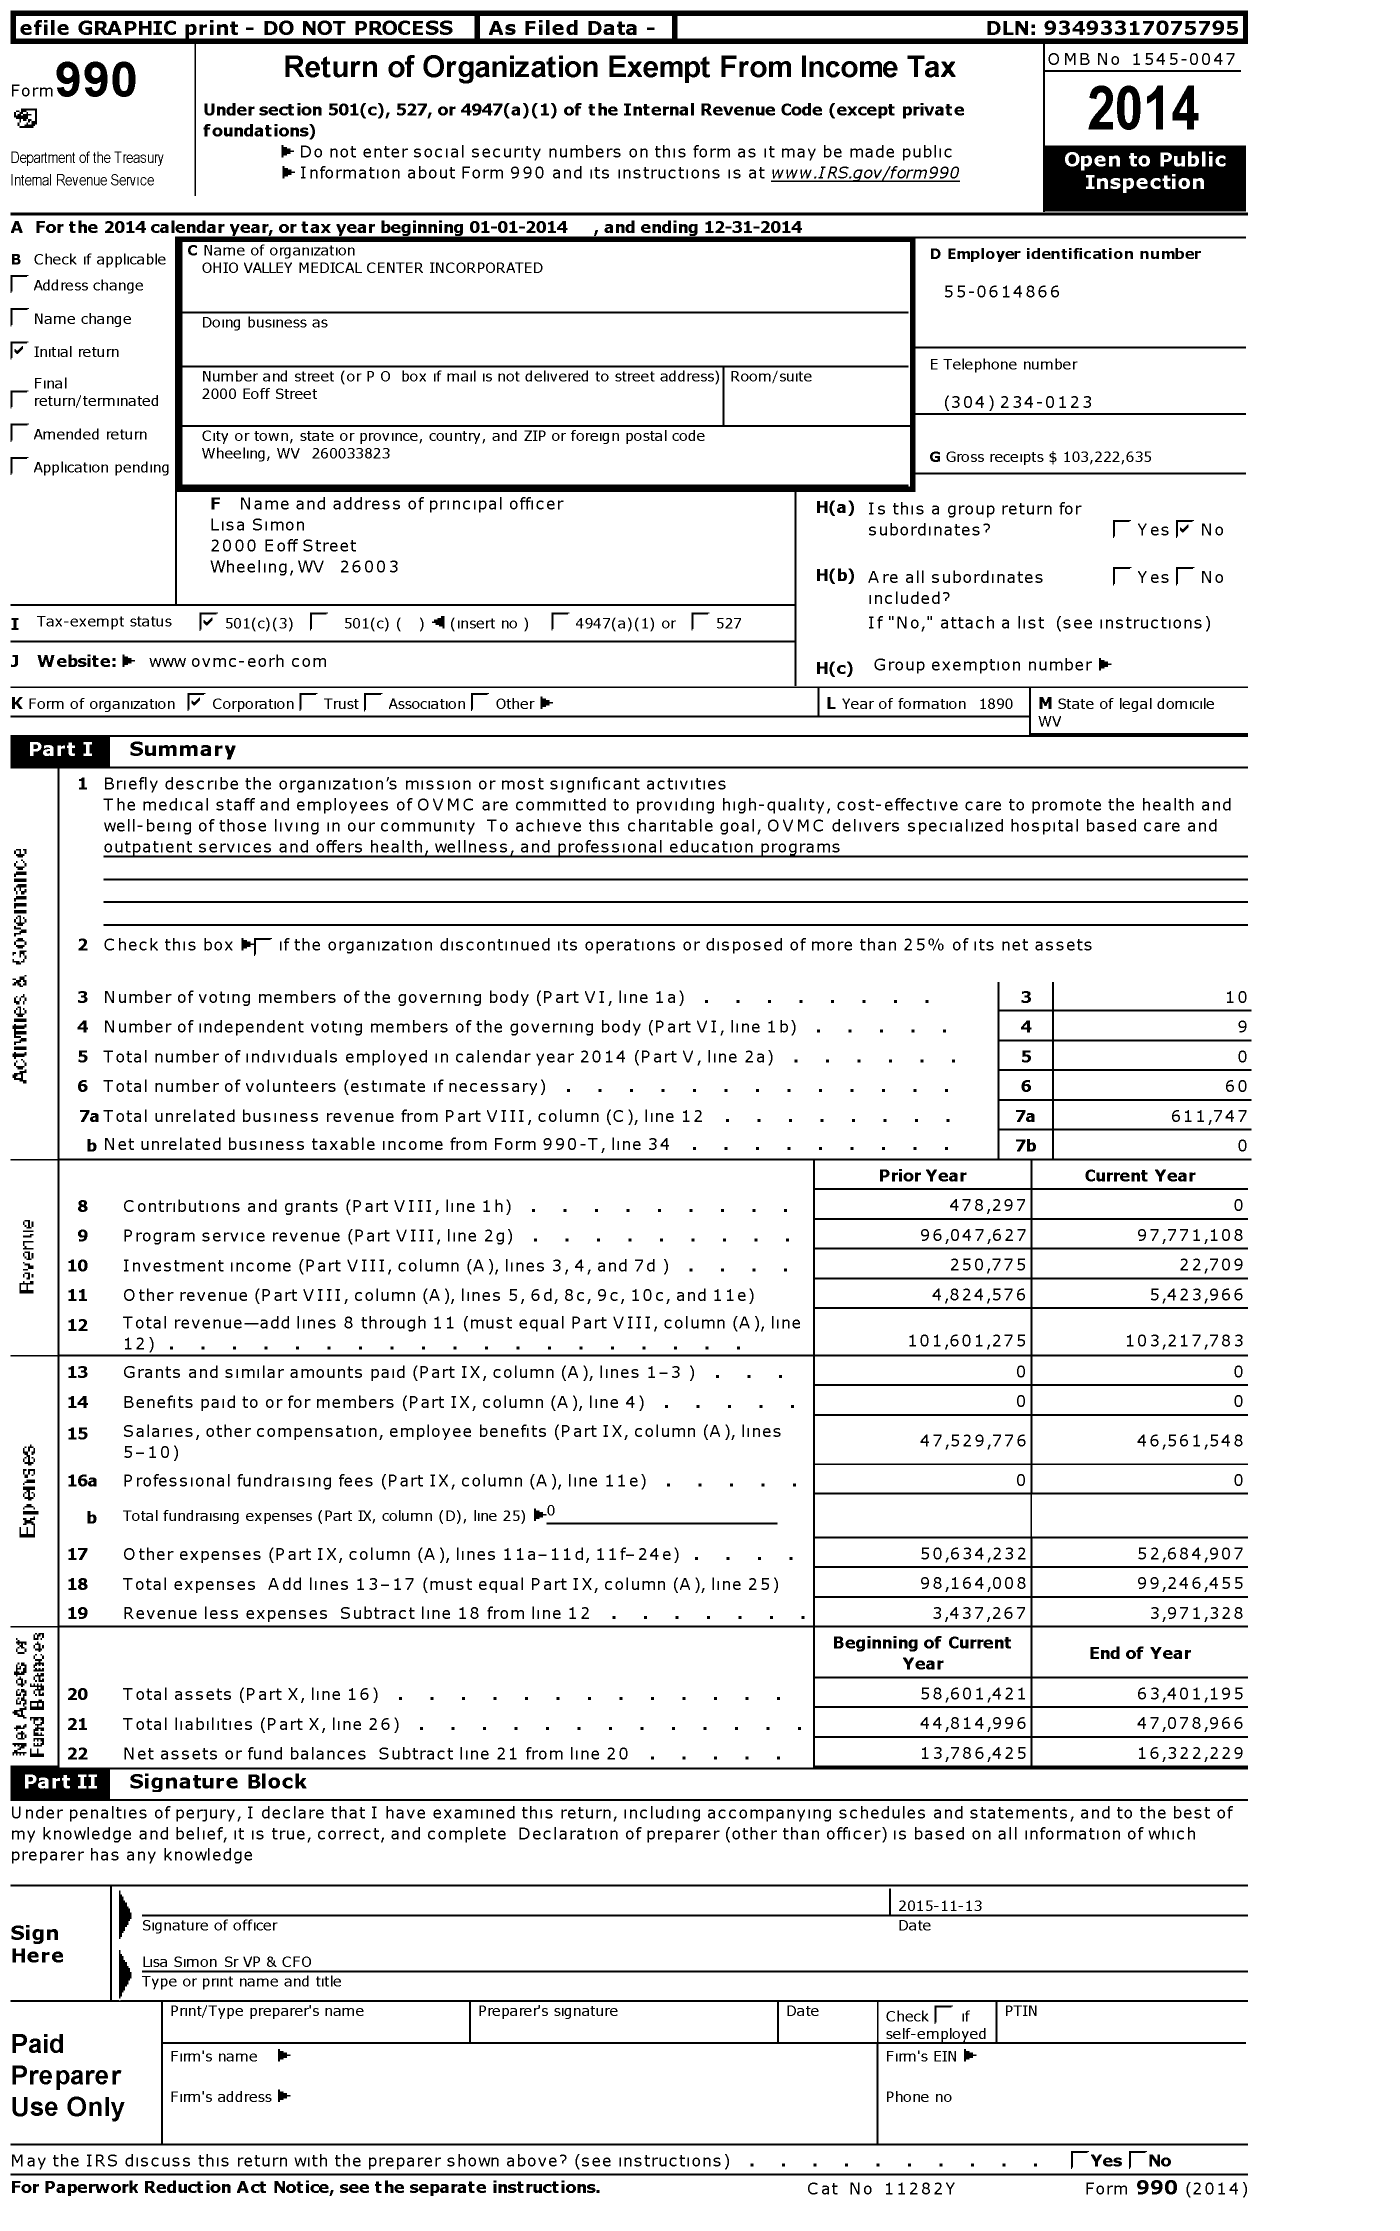 Image of first page of 2014 Form 990 for Ohio Valley Medical Center (OVMC)